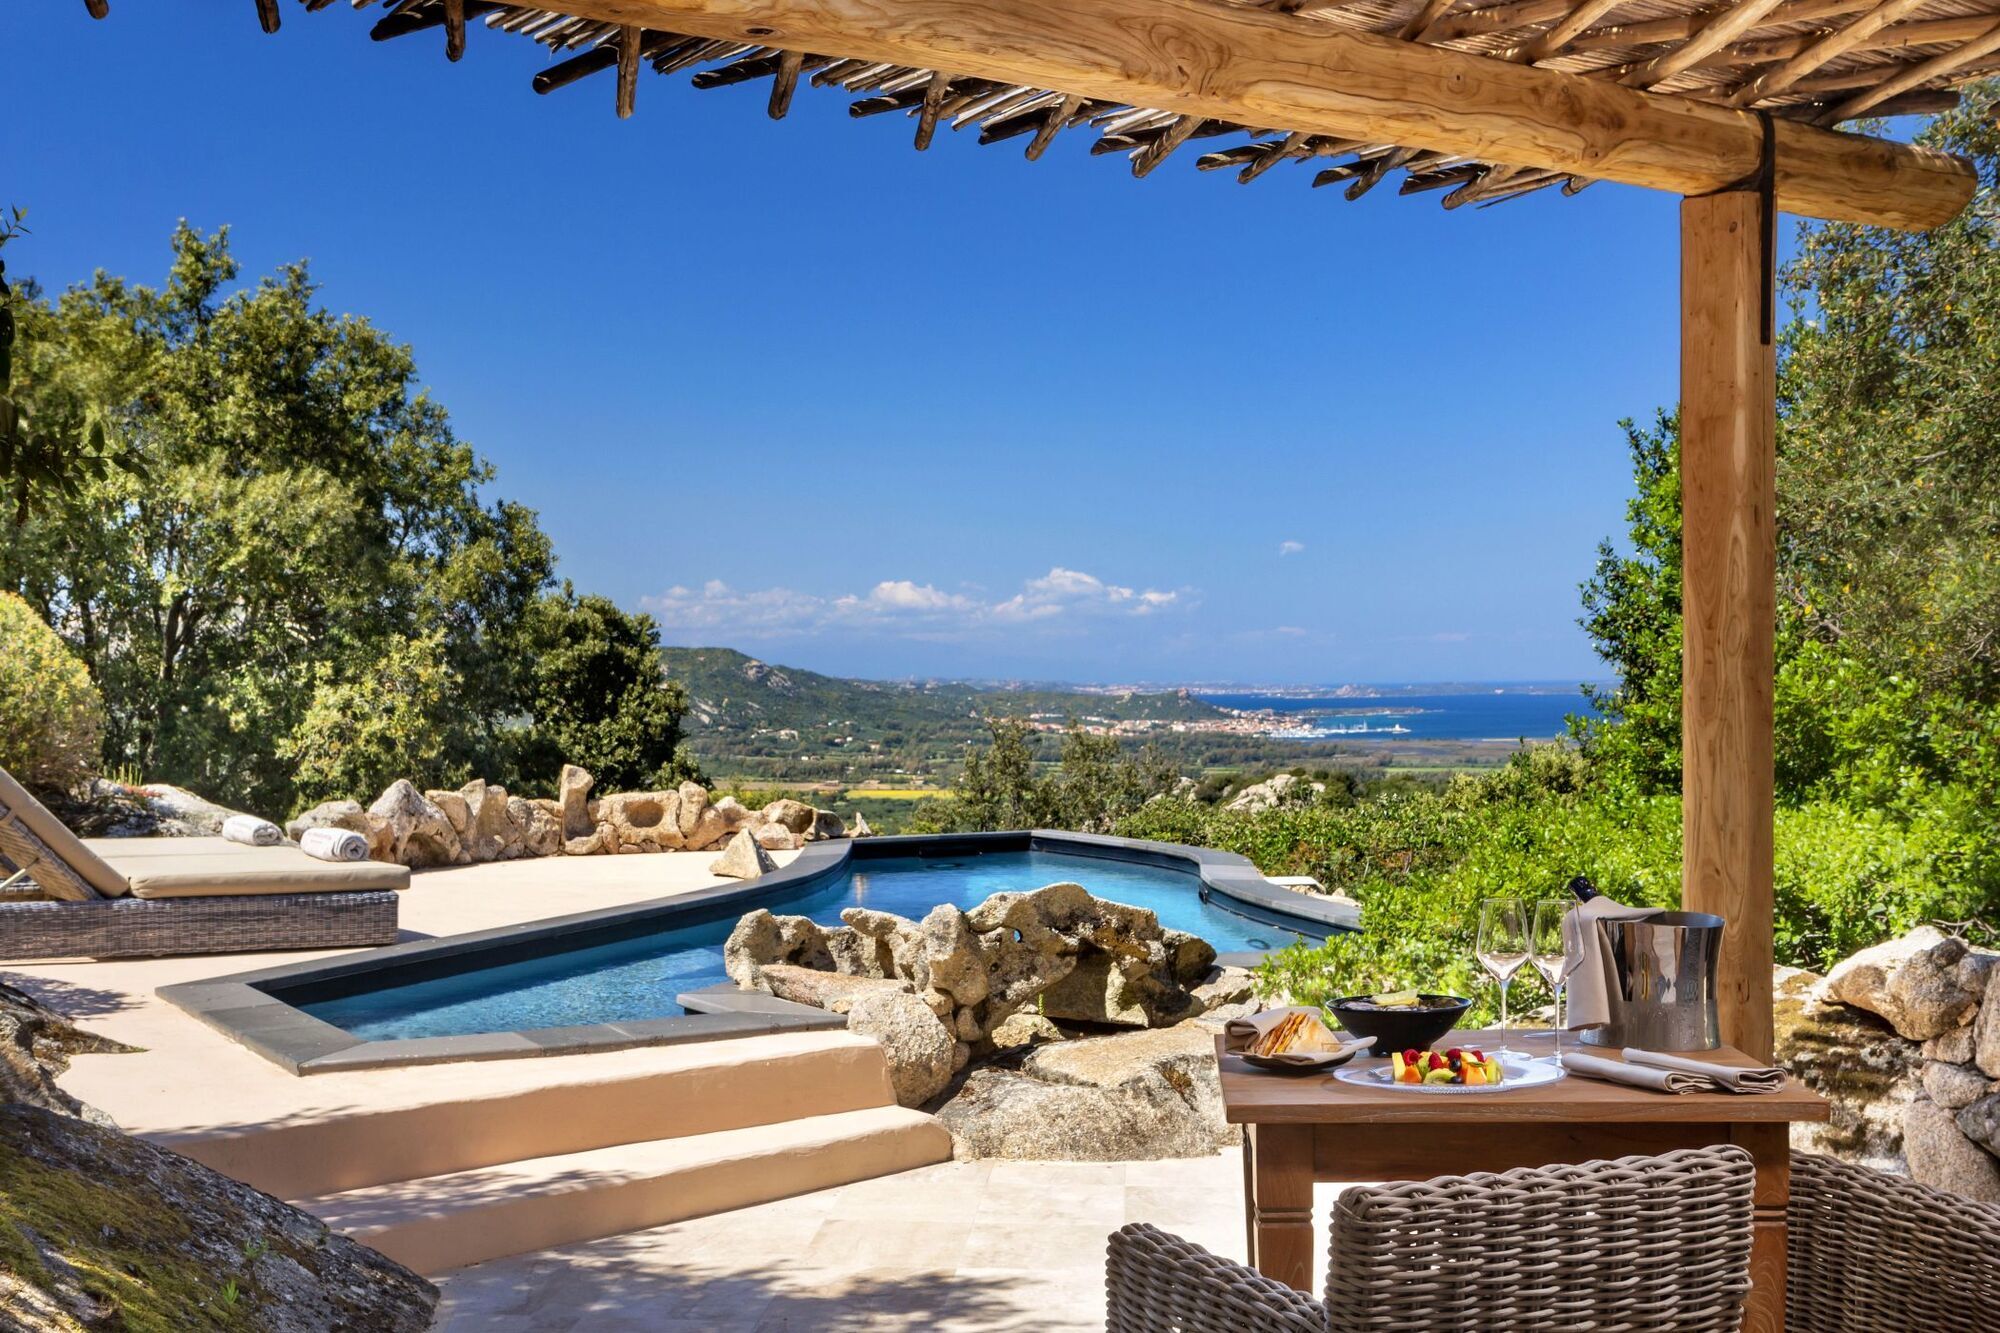 Top 6 best hotels in Sardinia: from chic villas with private pools to secluded boutiques in the mountains and historic houses with authentic experiences